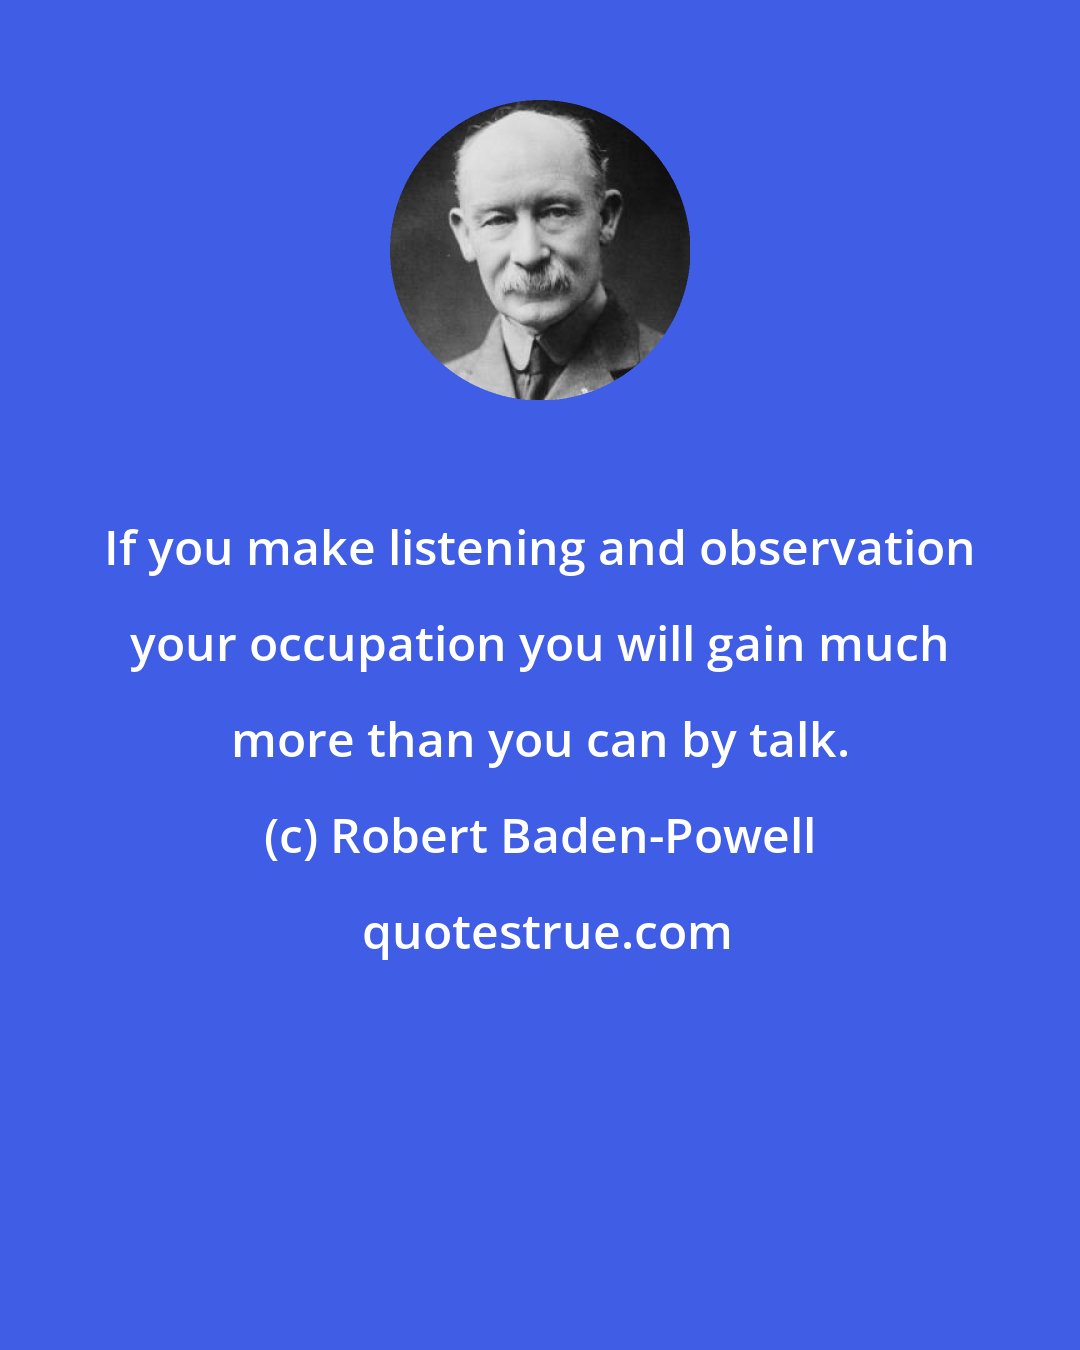 Robert Baden-Powell: If you make listening and observation your occupation you will gain much more than you can by talk.